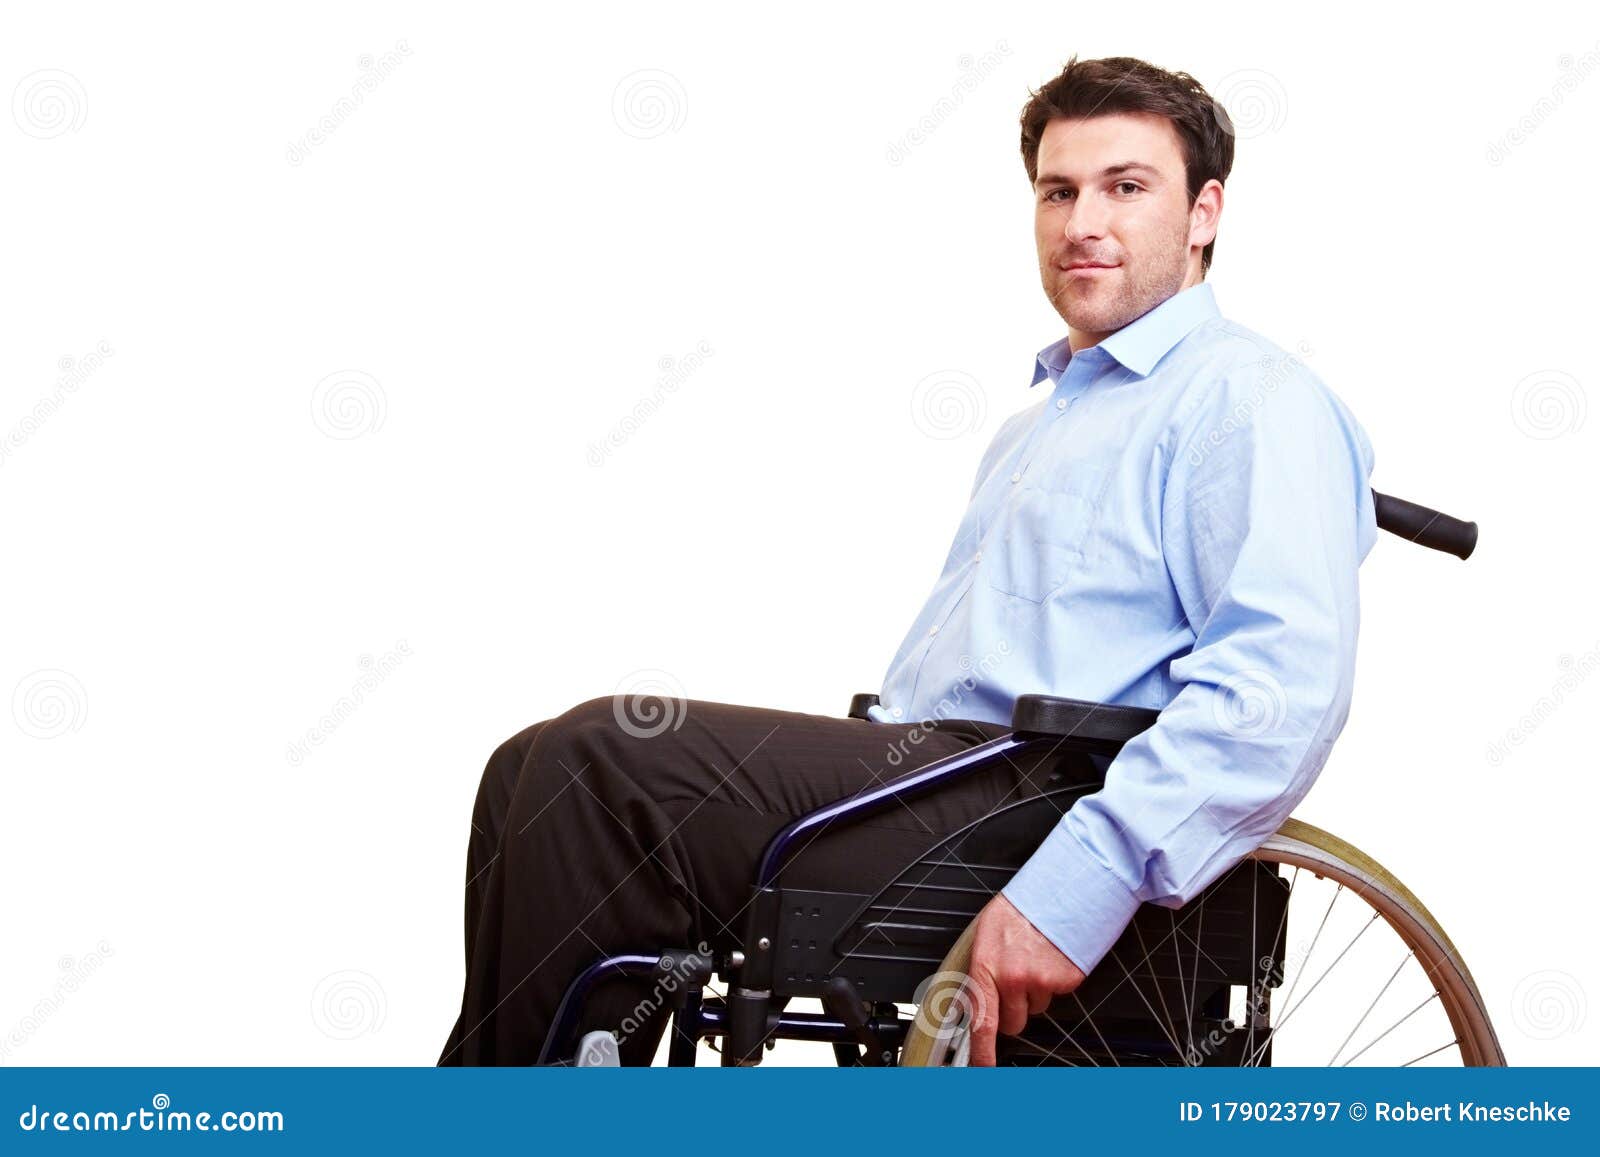 Businessman Sitting in a Wheelchair Stock Image - Image of person ...